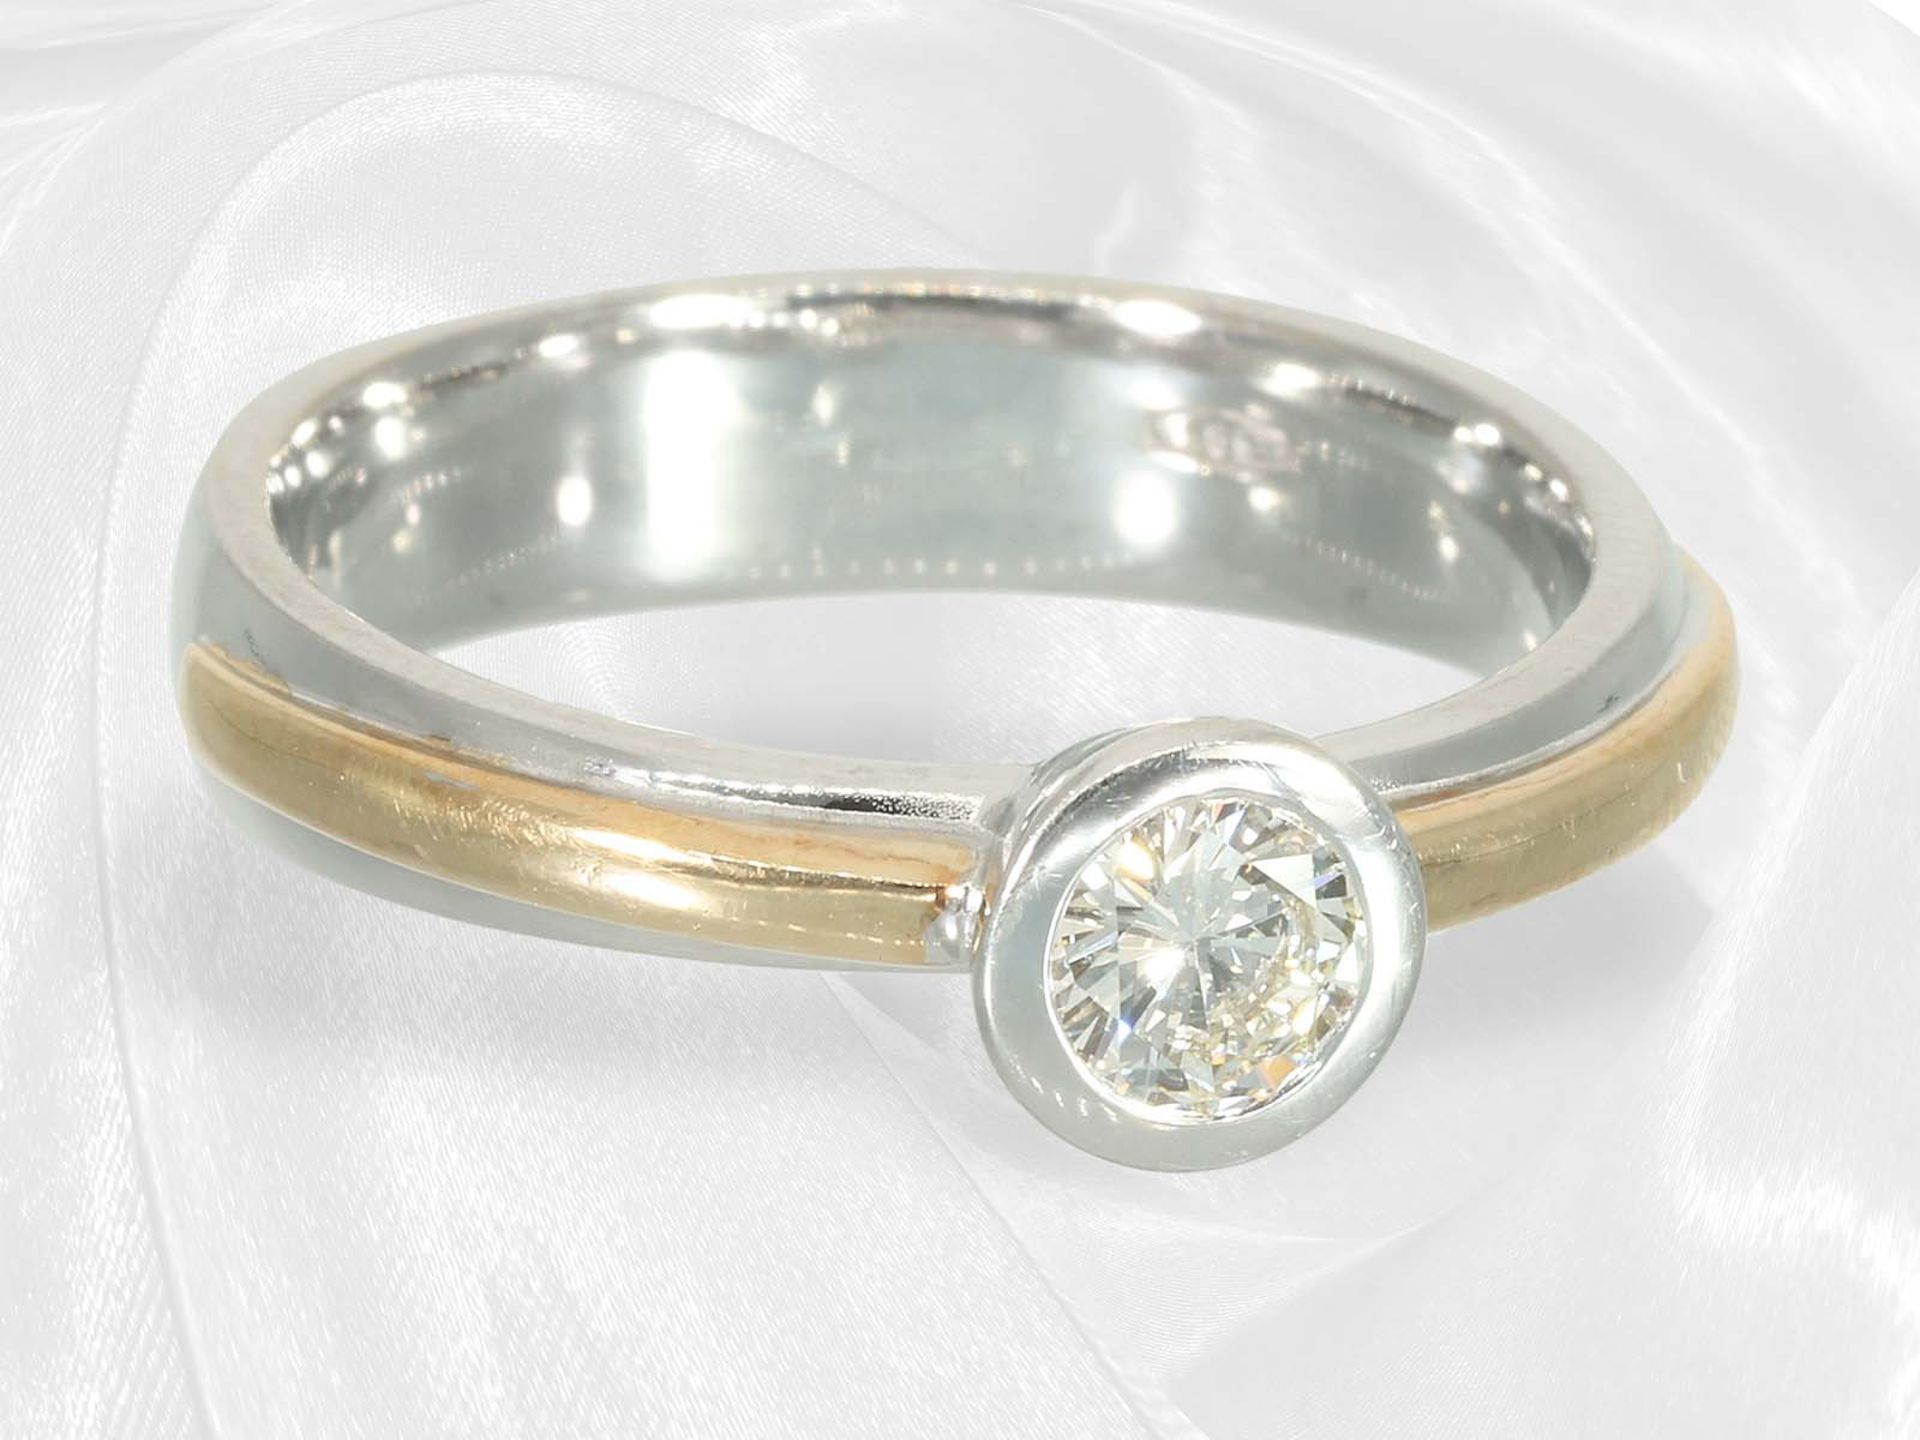 Modern and high quality bicolour goldsmith ring with a brilliant-cut diamond of approx. 0.41ct - Image 2 of 4